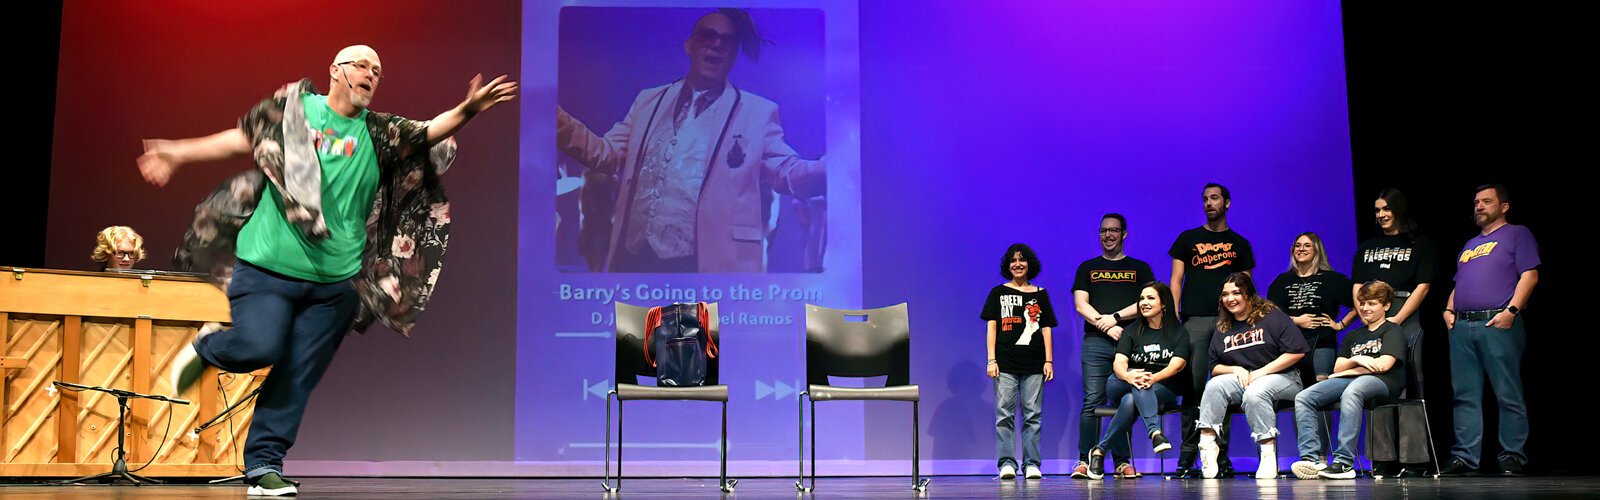 During the New Tampa Performing Arts Center Fall Festival, Donald B. Holt Jr. performs in “Barry’s Going to the Prom” with MAD Theatre of Tampa.